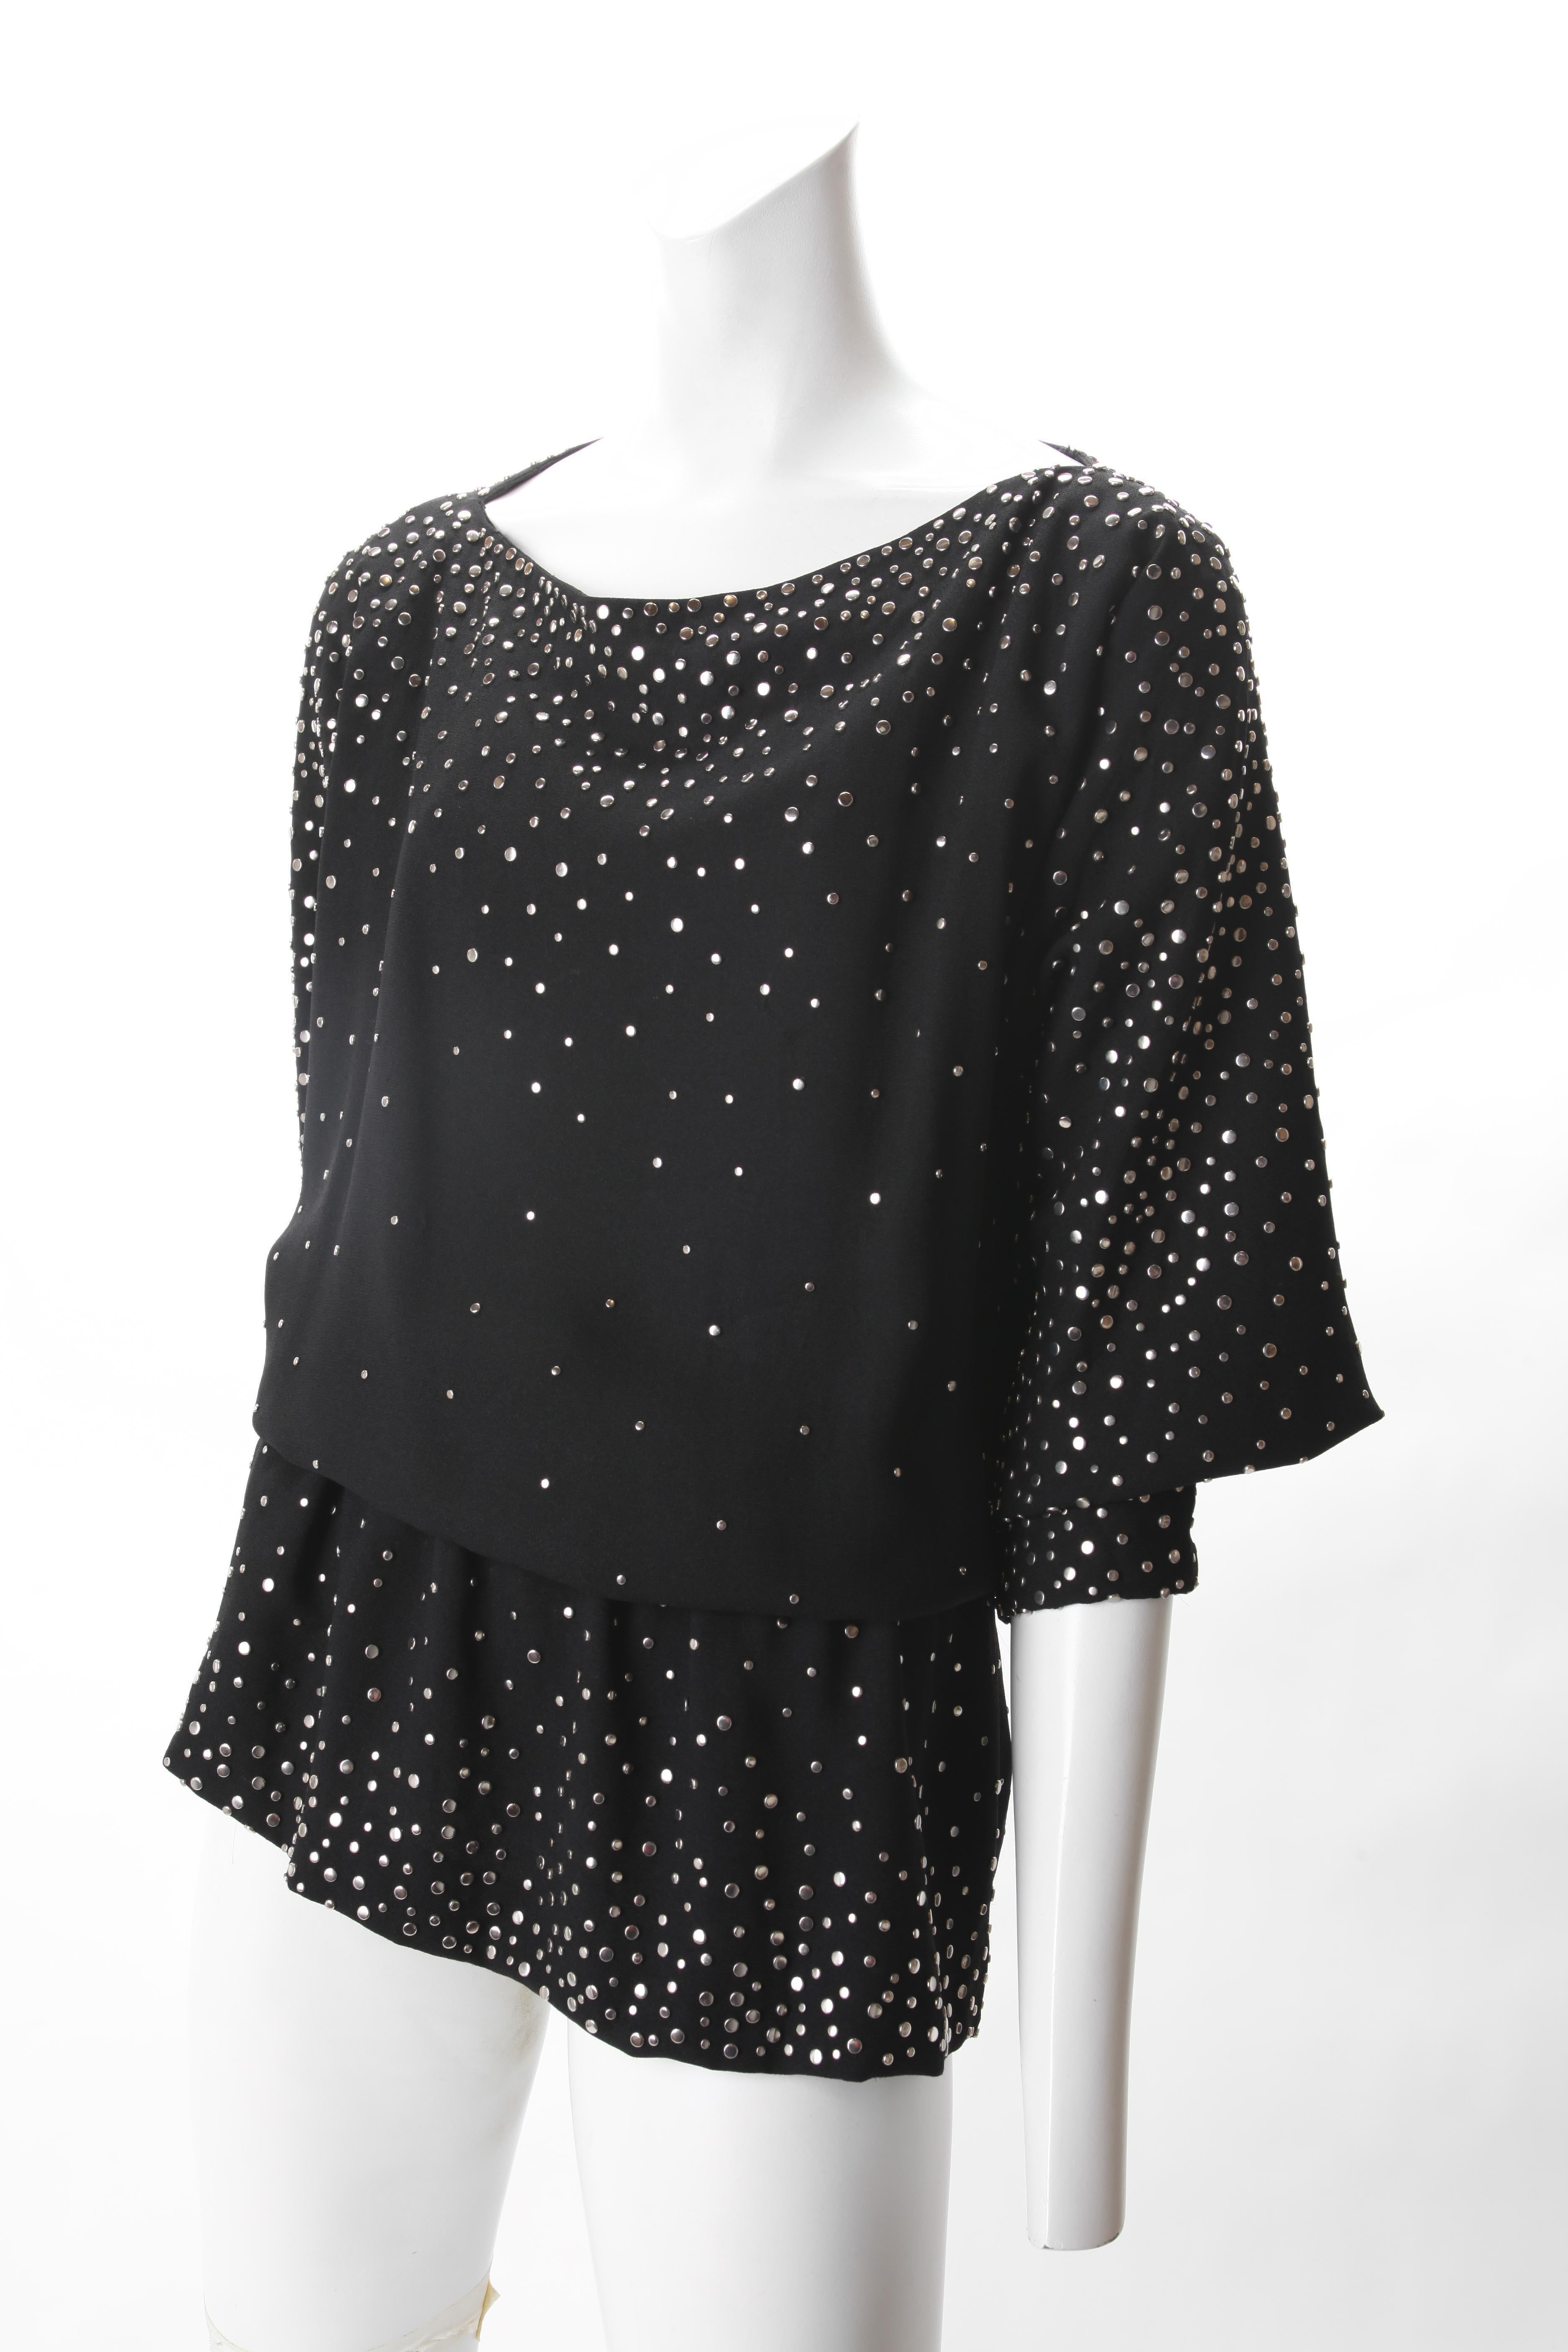 Halston Black Crepe Studded Tunic, c.1970s.
Halston Black Crepe Tunic featuring bateau neckline and elasticated waist. Allover studs creates a Starry night effect.  

Diffusion Line
Fits Us Size : Due to the elasticated waist it is versatile in